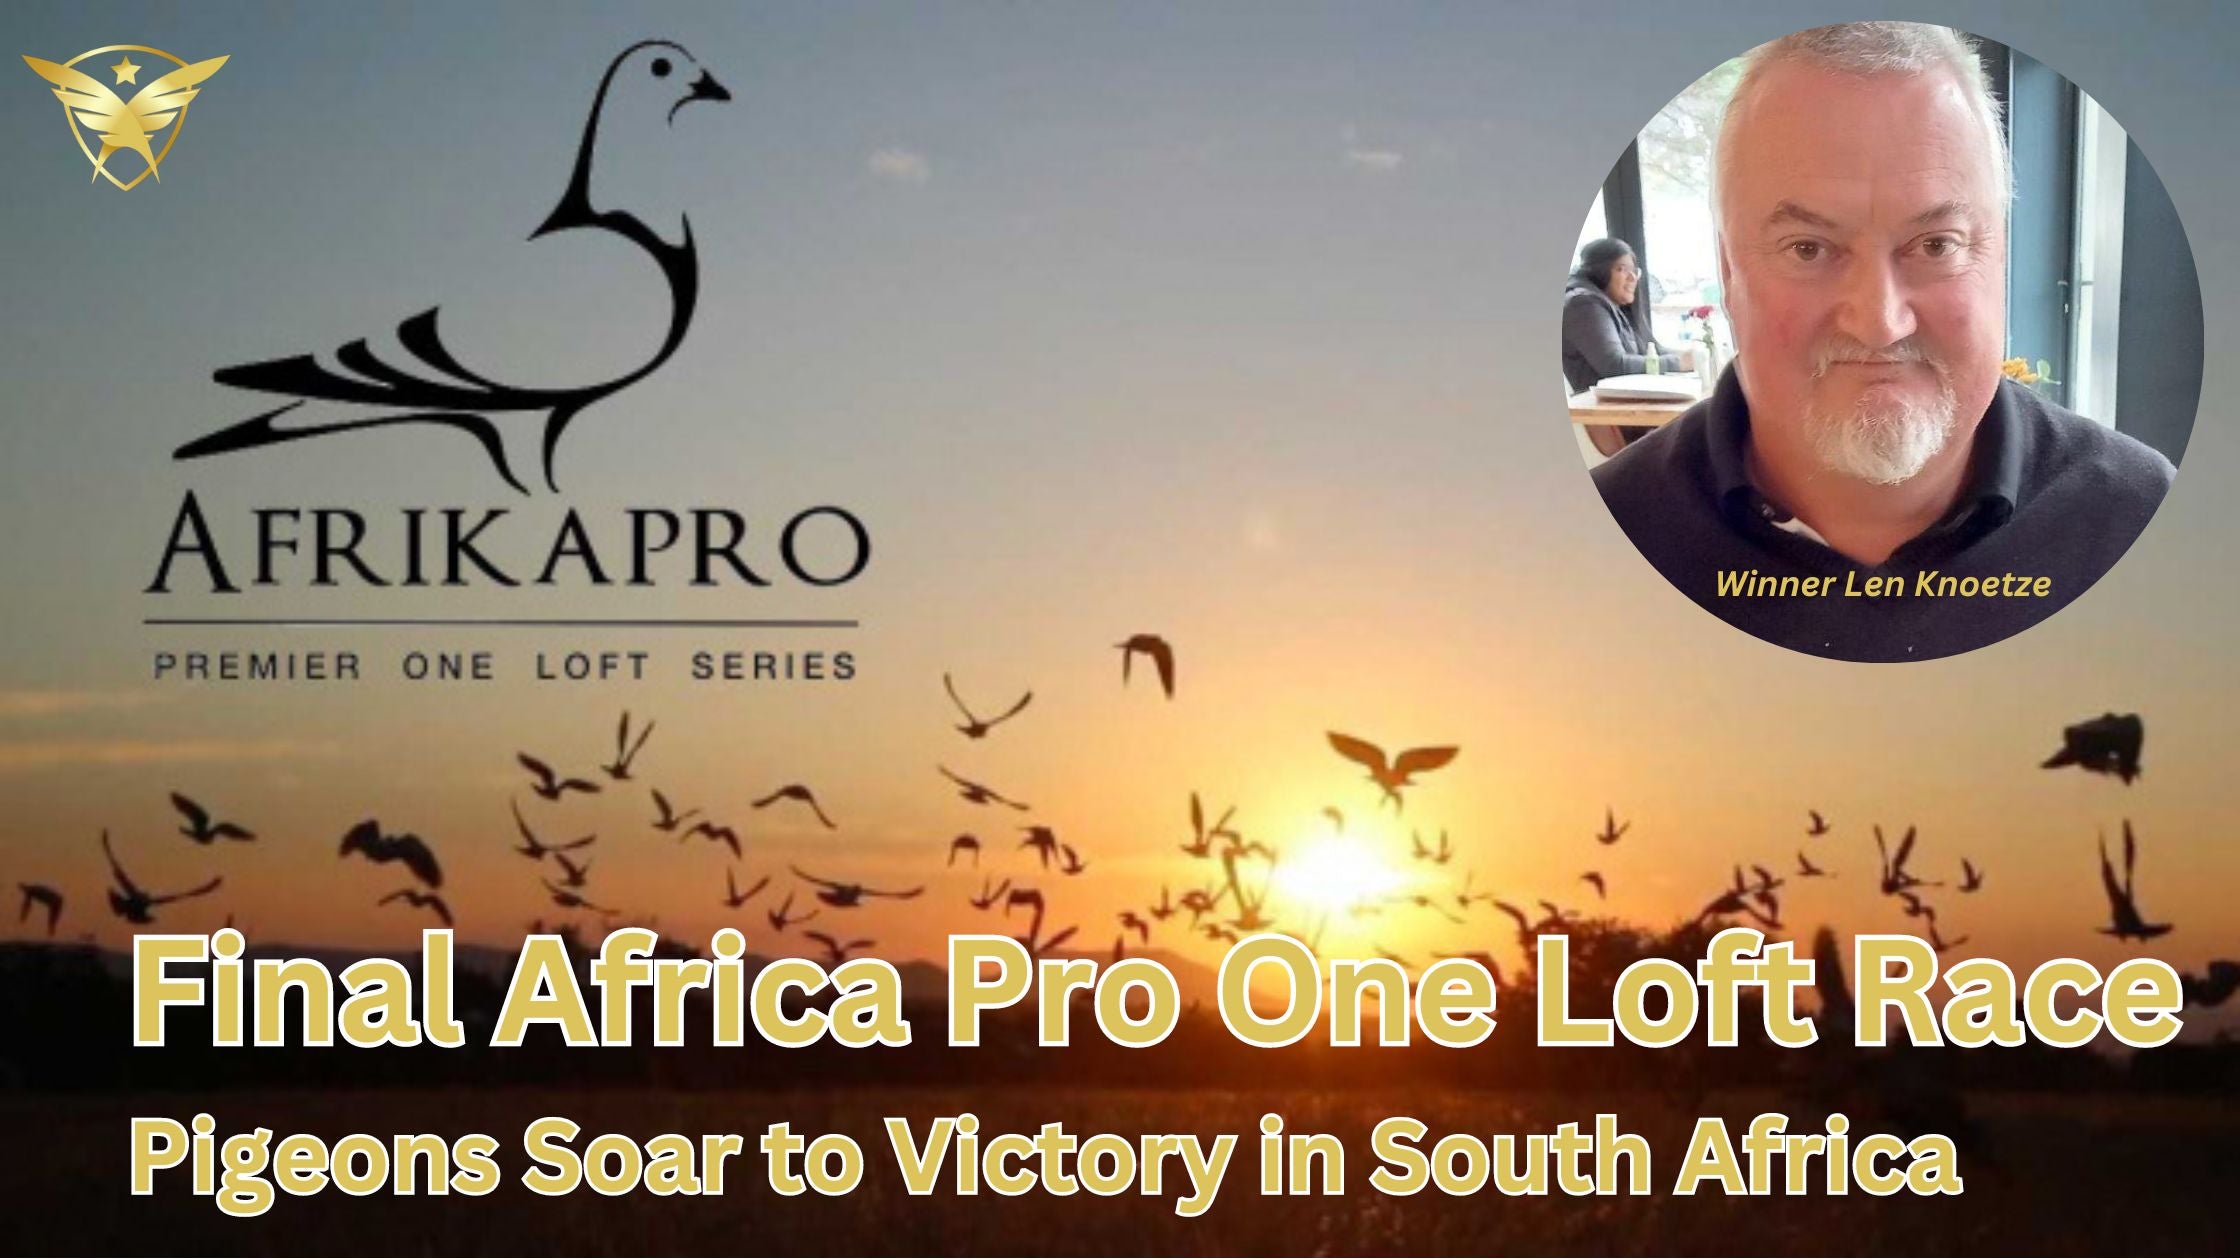 Final Africa Pro One Loft Race: Pigeons Soar to Victory in South Africa